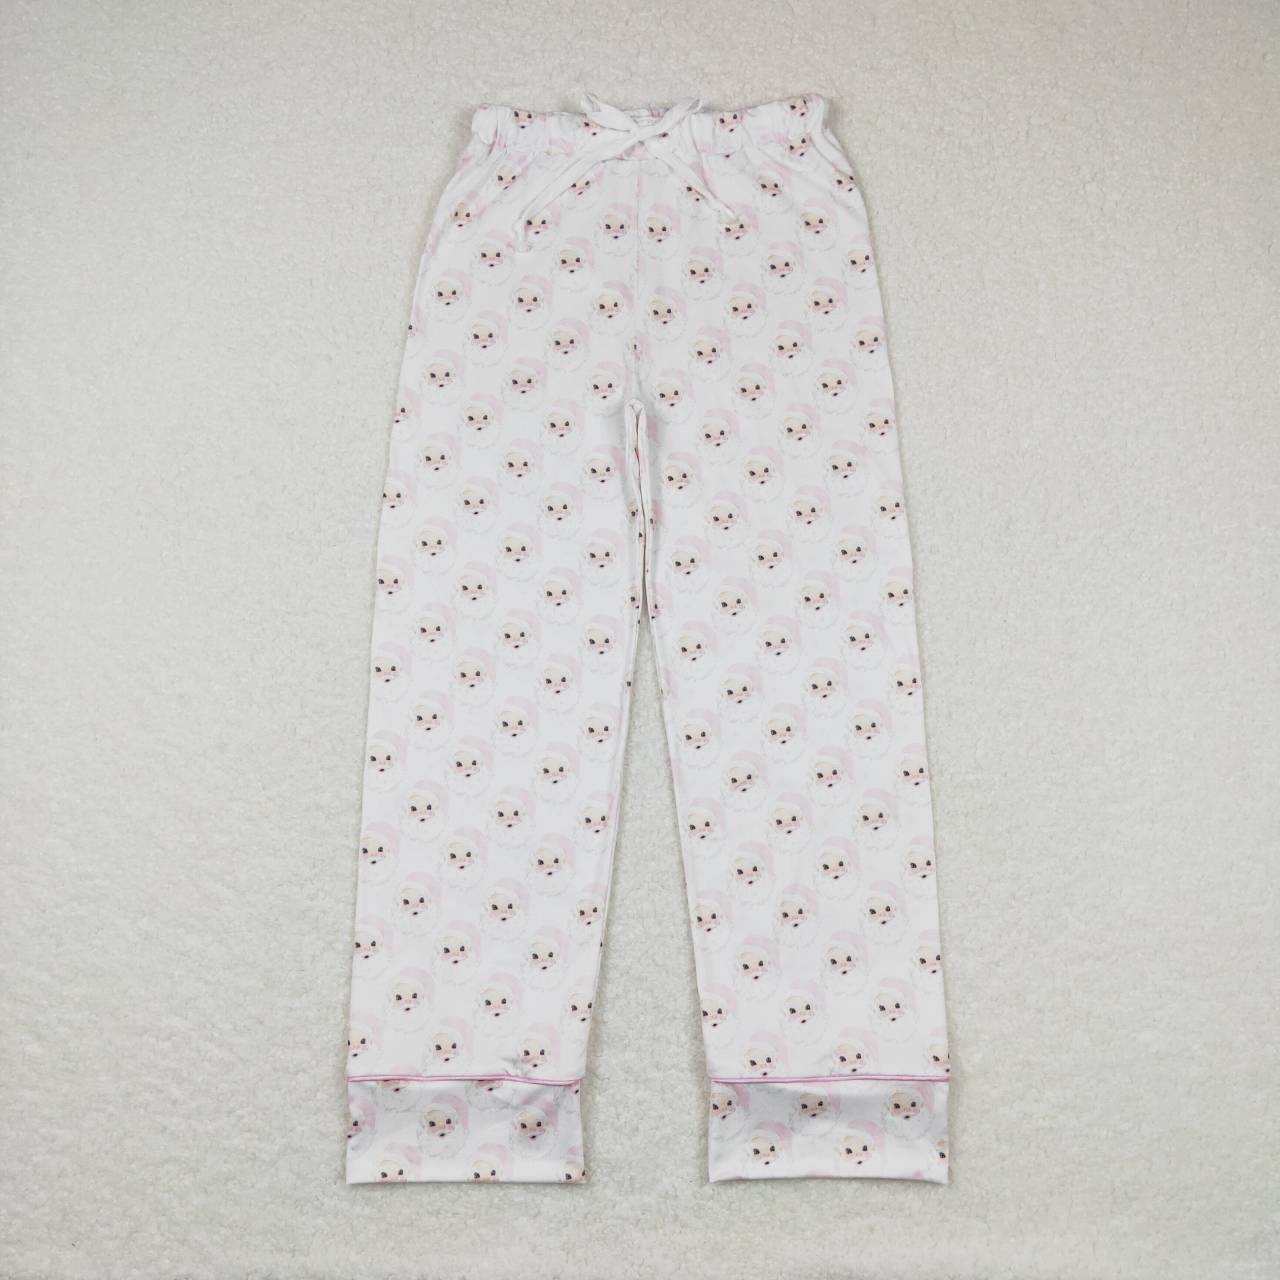 P0269 Adult Santa Claus pink and white trousers